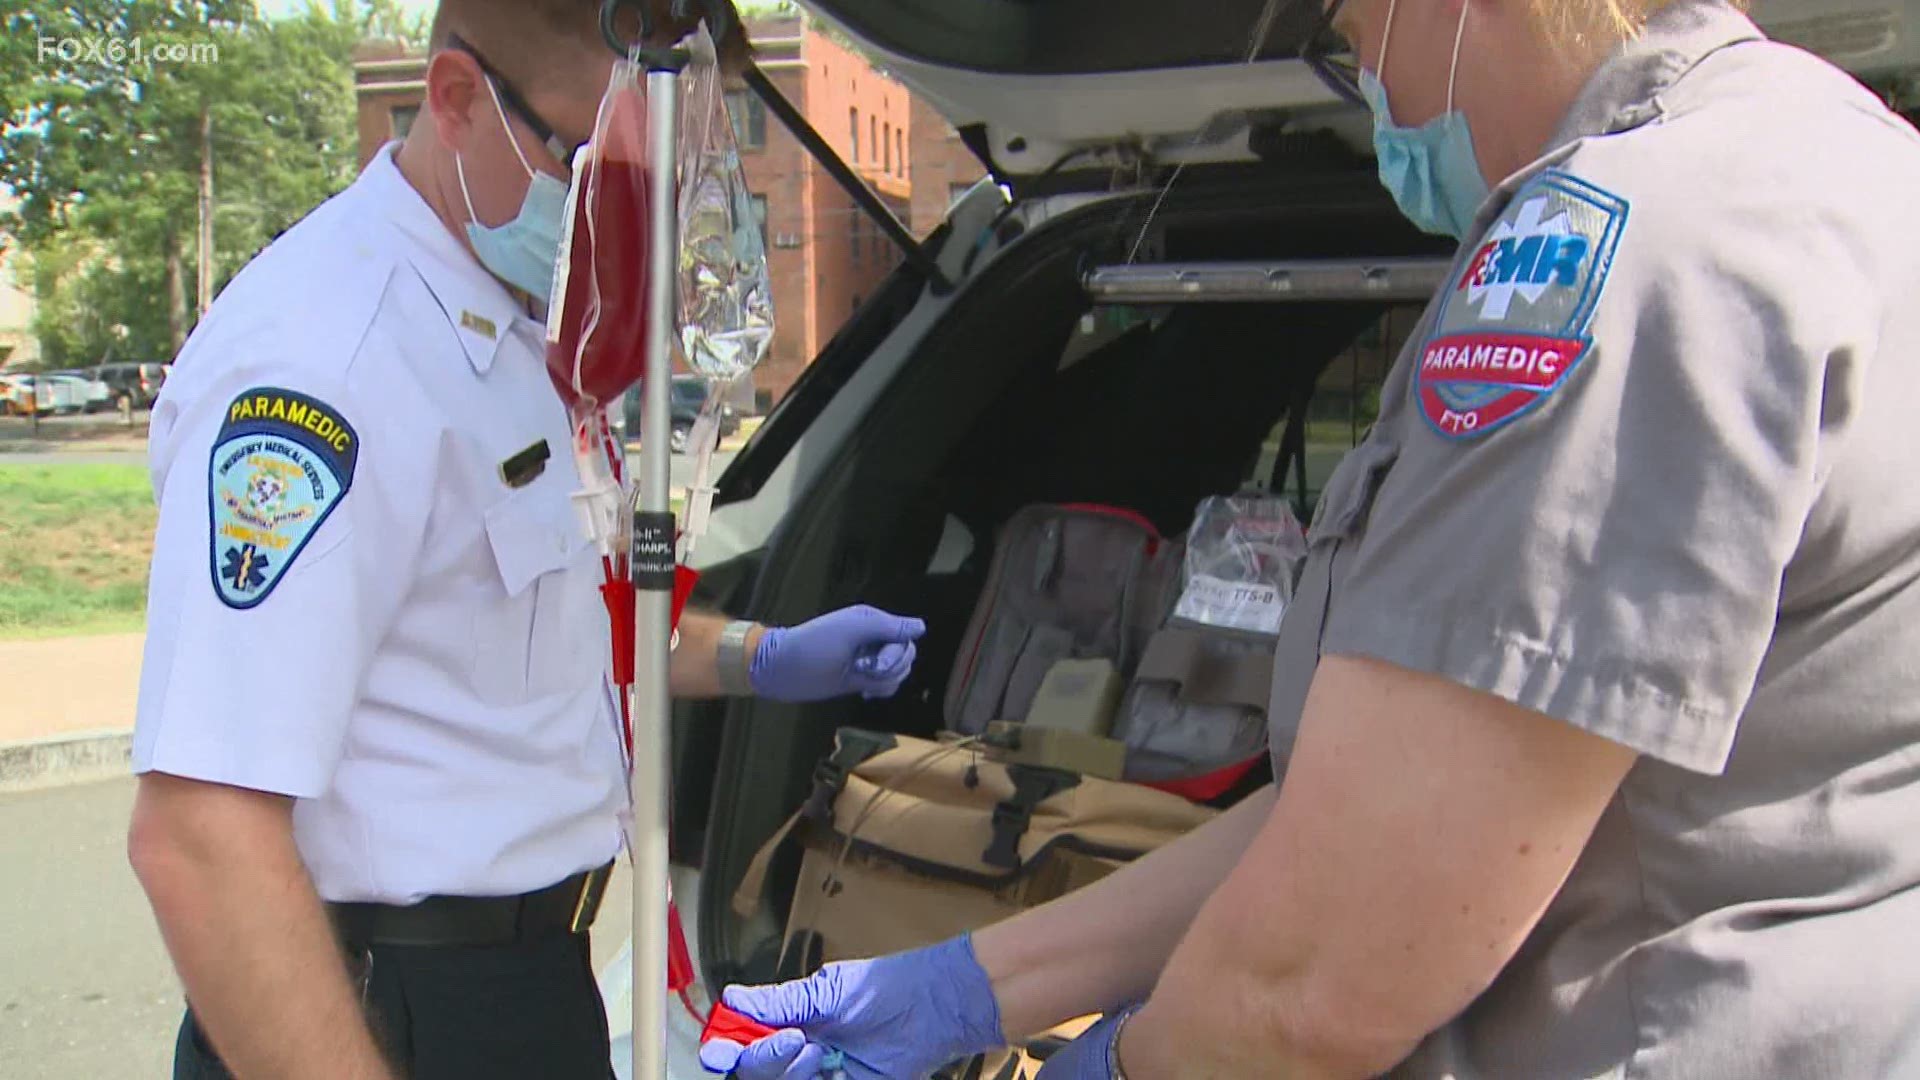 In an effort to equip ambulances with even more life-saving technologies, AMR is providing the funding and training to bring "Whole Blood" crews.